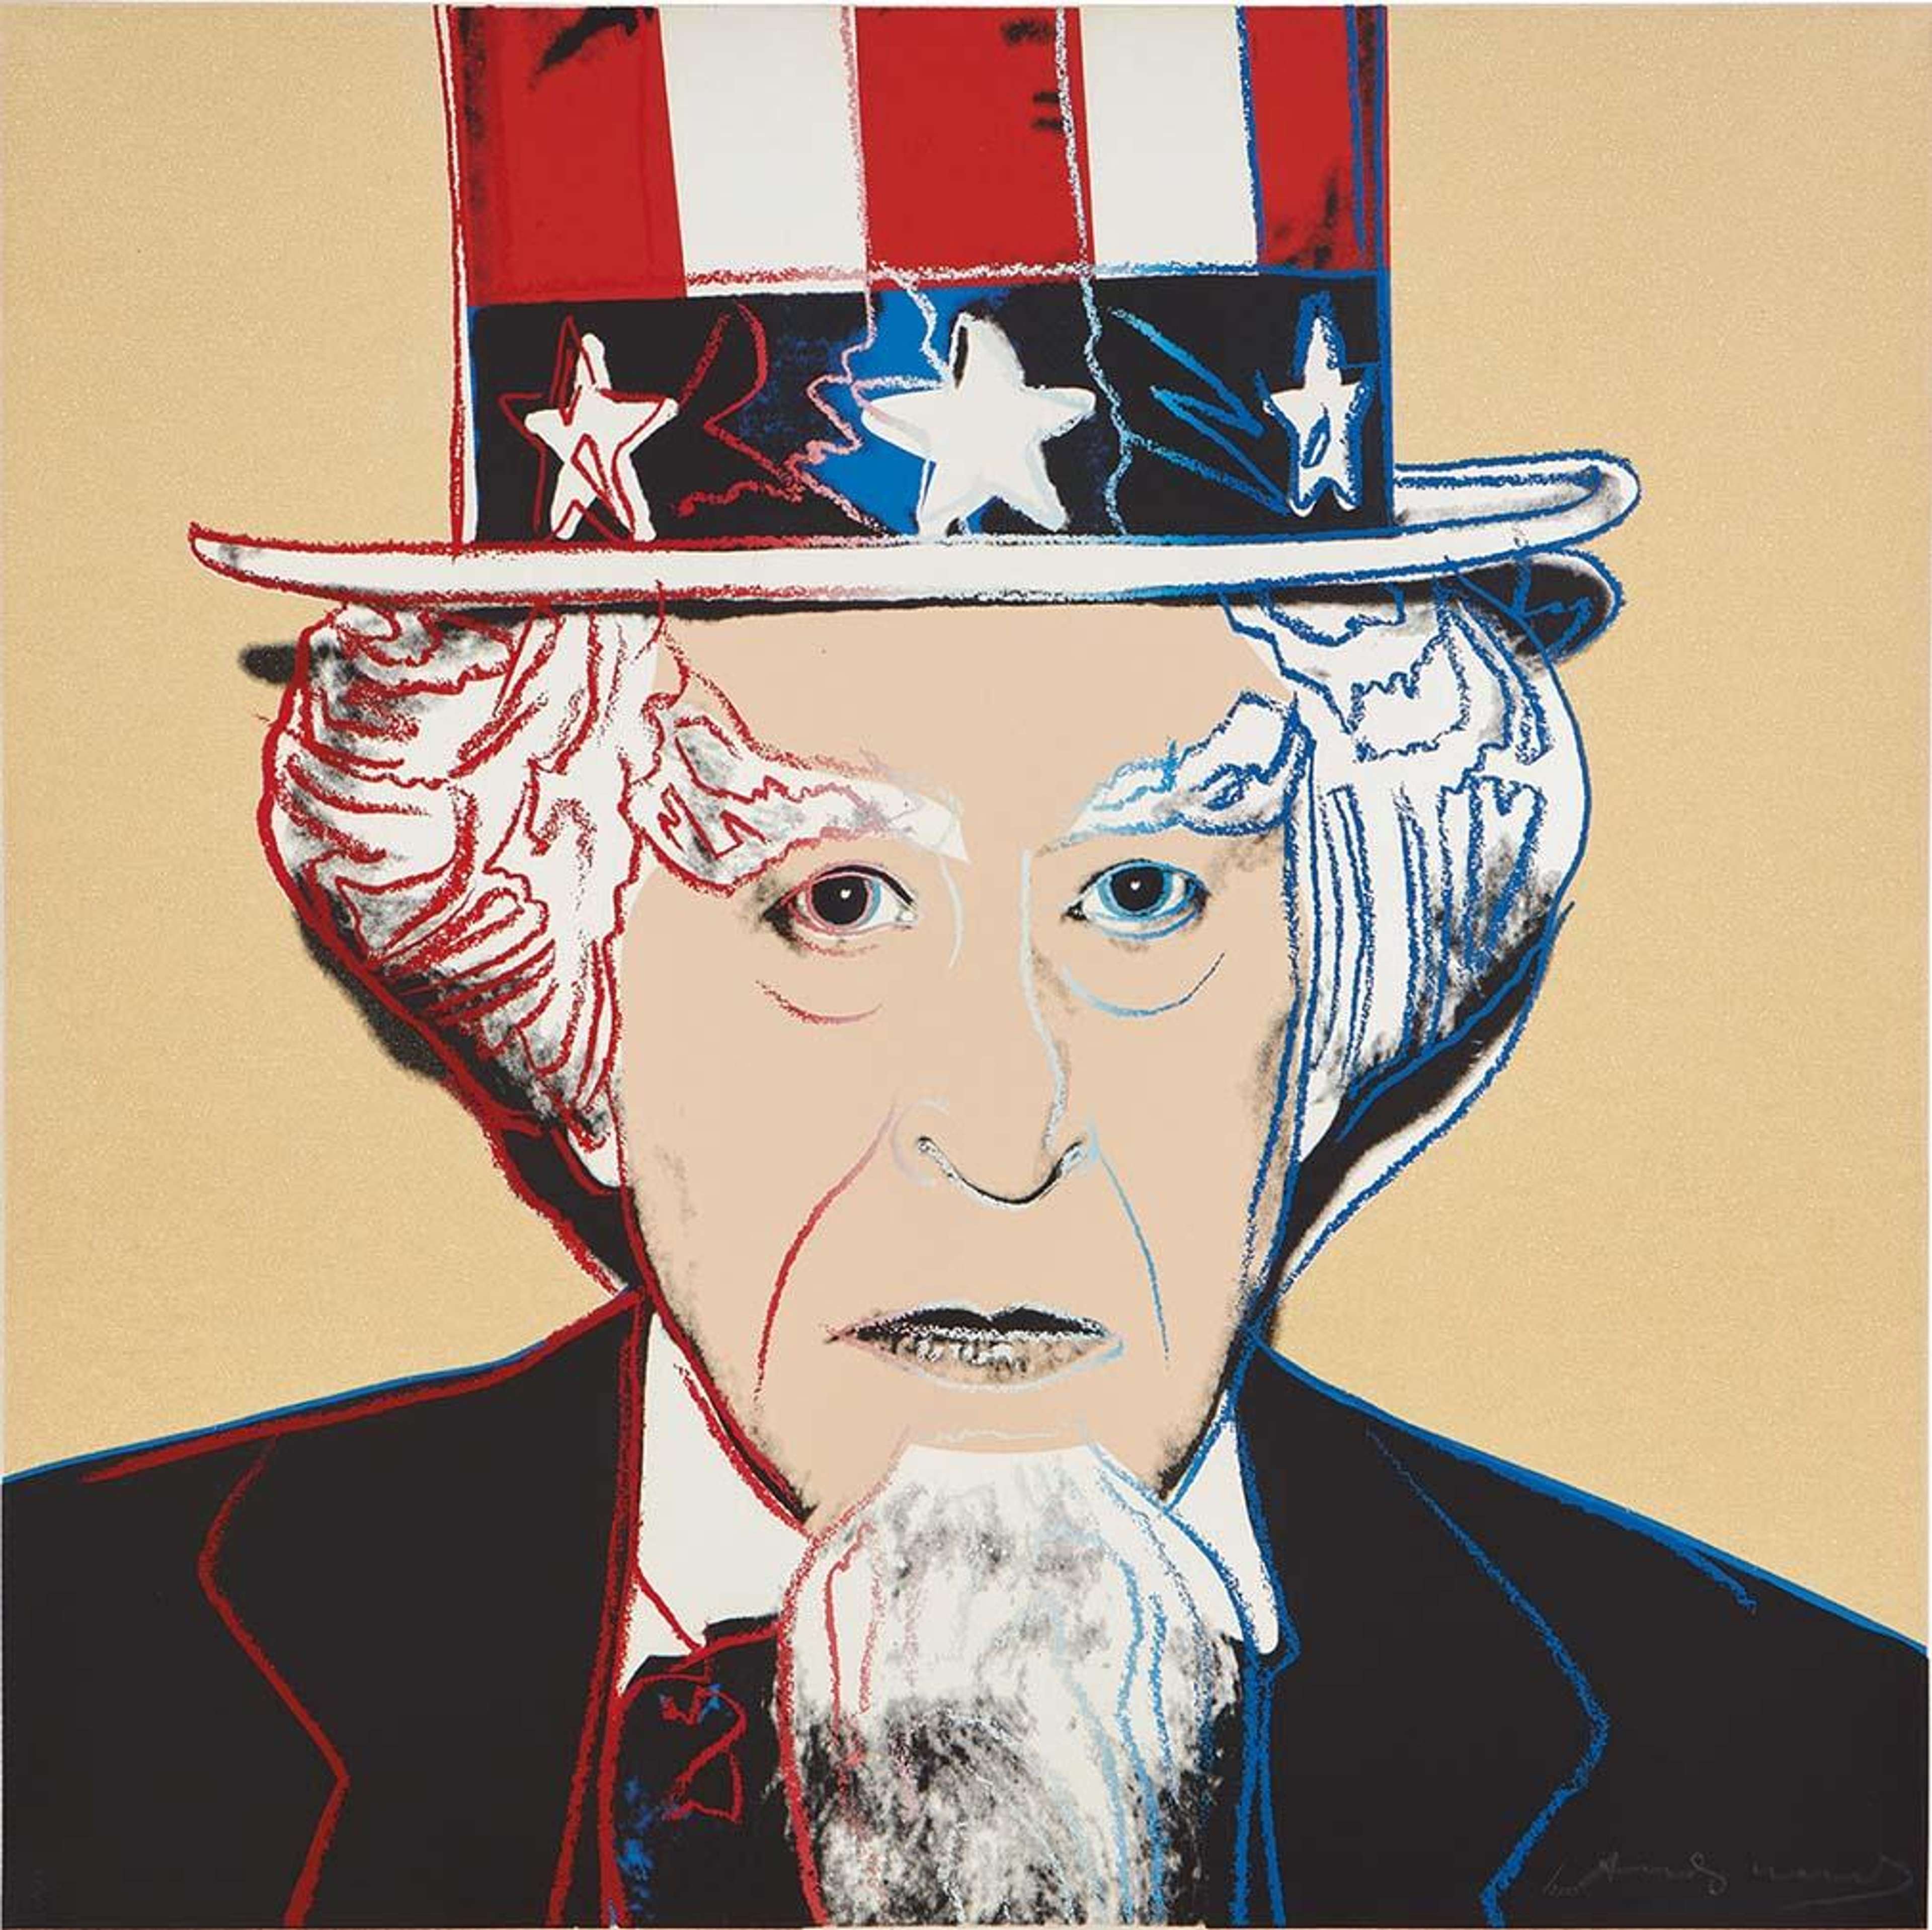 This print shows a portrait of Uncle Sam, a fictional figure who was created to represent the US government. Against a pale yellow backdrop, Uncle Sam is rendered in Warhol’s characteristic visual style with bright red and blue gestural lines delineating the icon’s facial features.